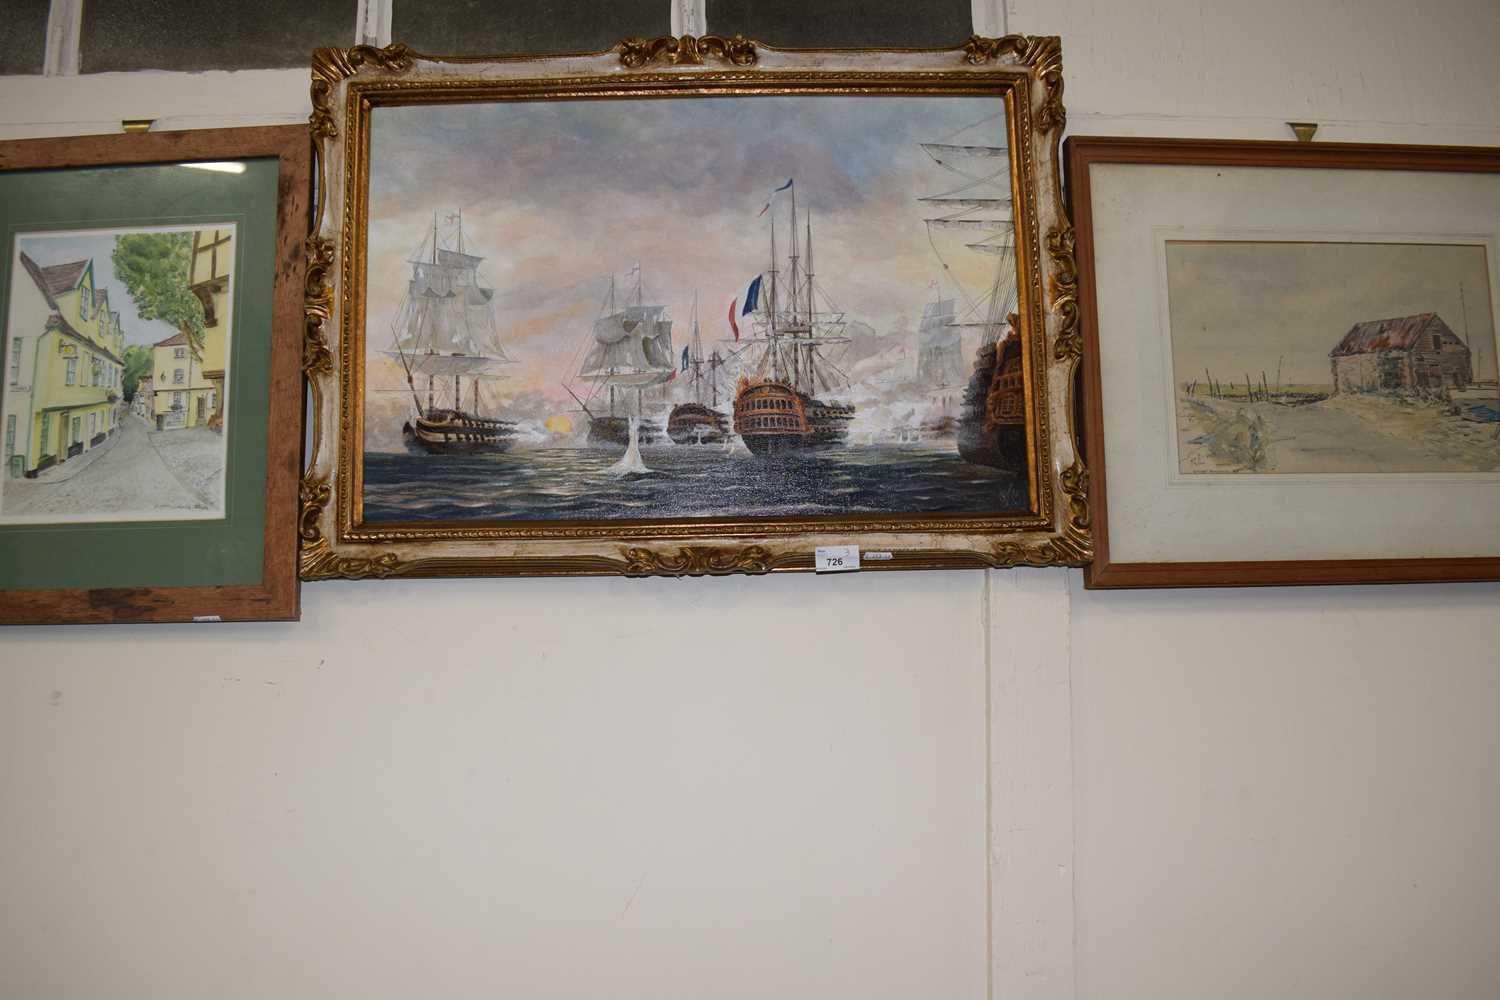 French and English Warships at Sea together with a barn on the marshes and a street scene (3)